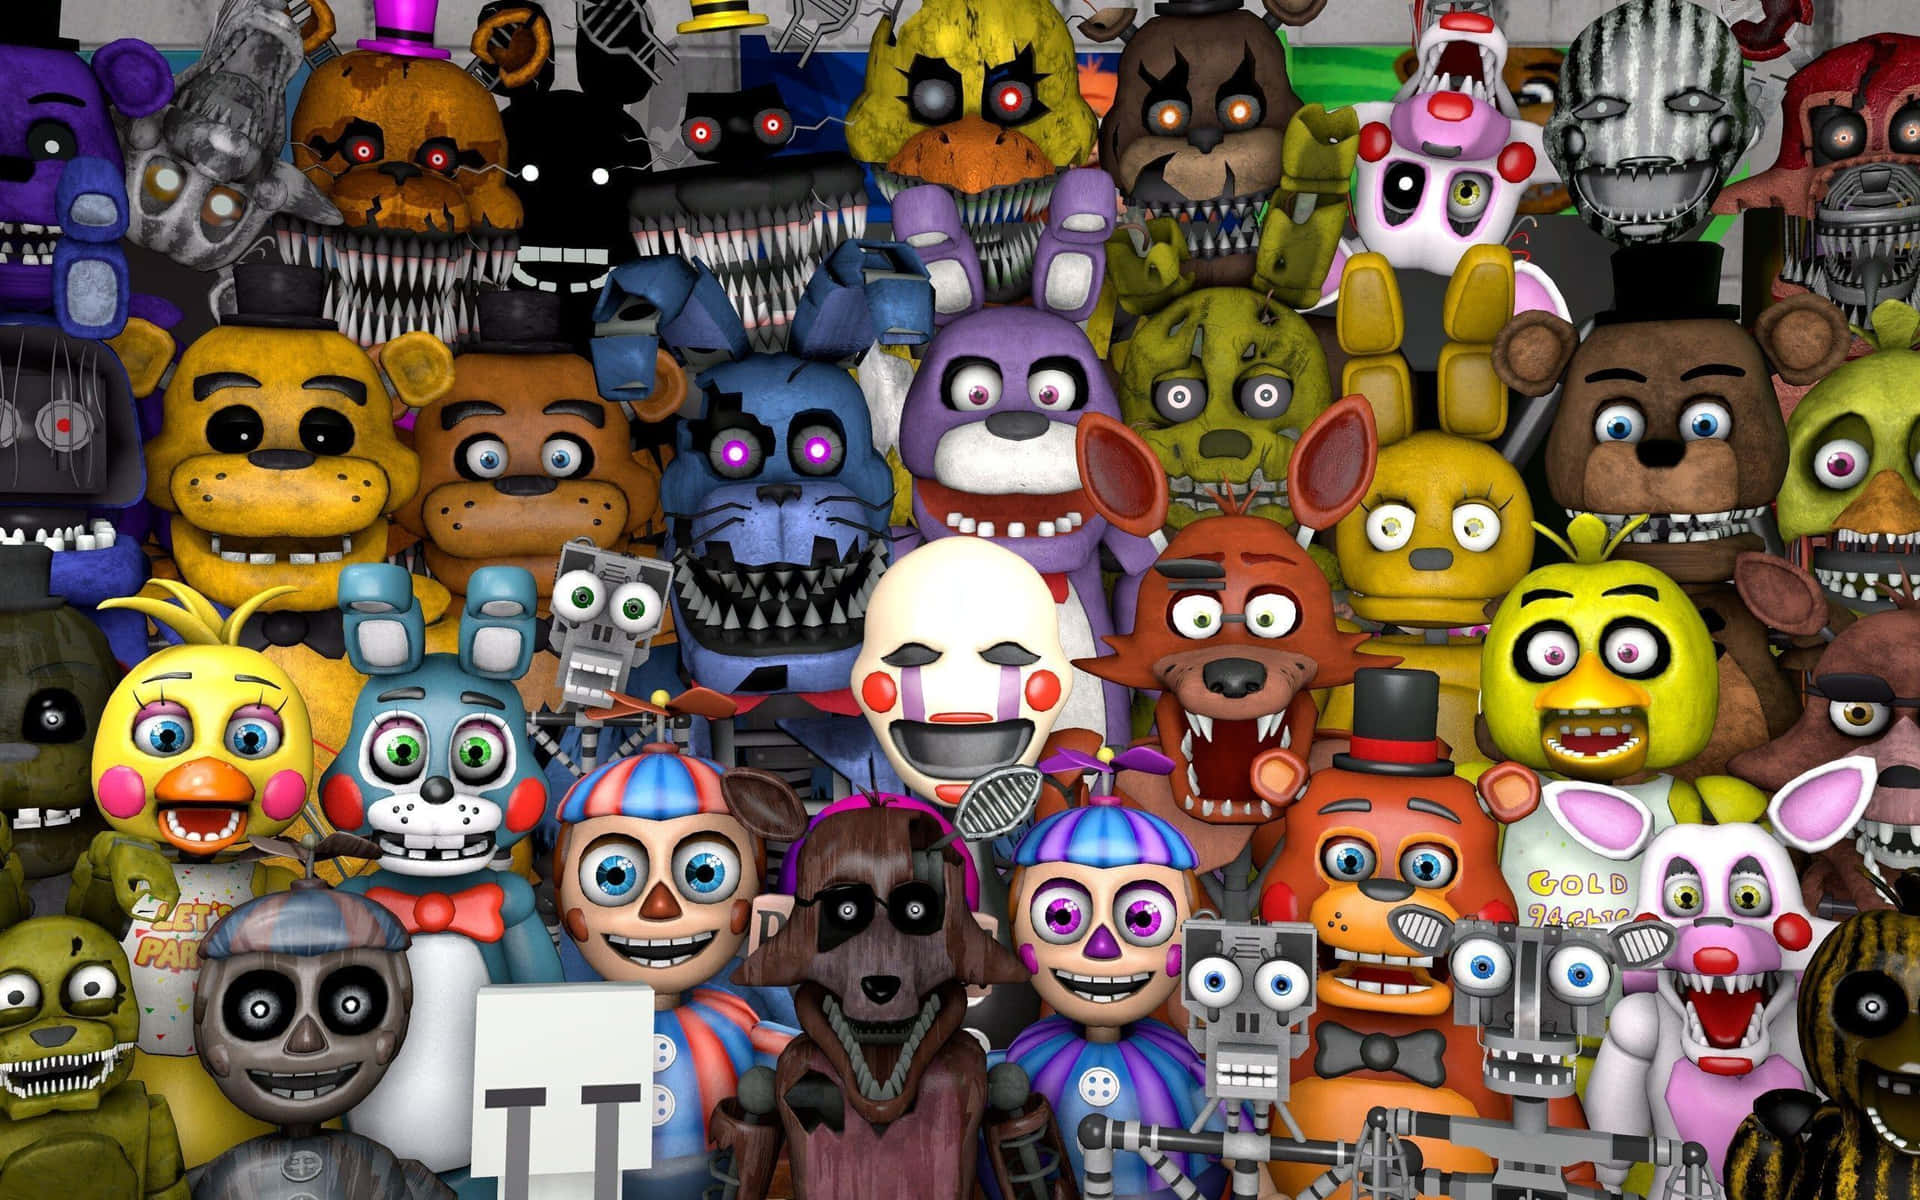 Meet the Characters from Five Nights at Freddy's!